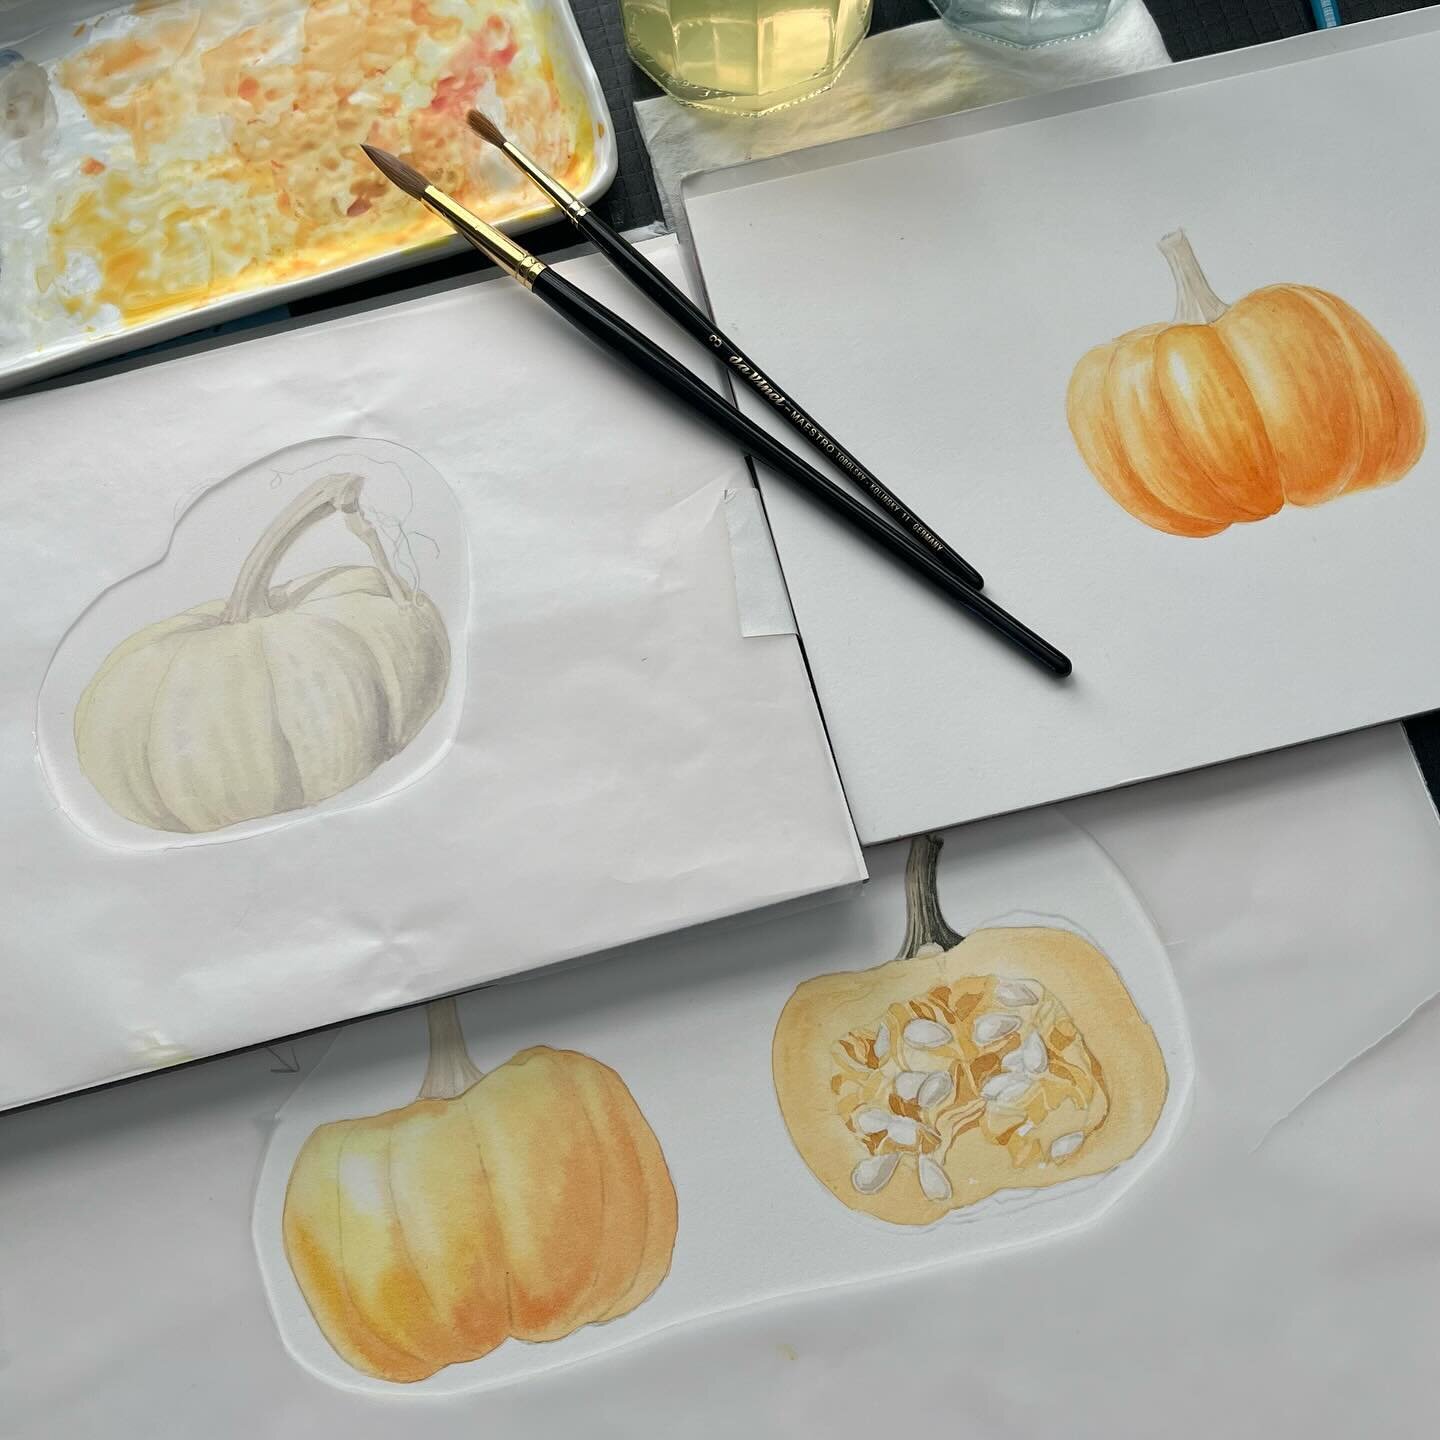 Post-class desk view - little pumpkins in progress! Yesterday I wrapped up teaching the Fall &lsquo;23 edition of my Capturing Seasonal Color class through @mhsbotanicalart / @masshort &mdash; we focused on fruits in the gourd family, including how t